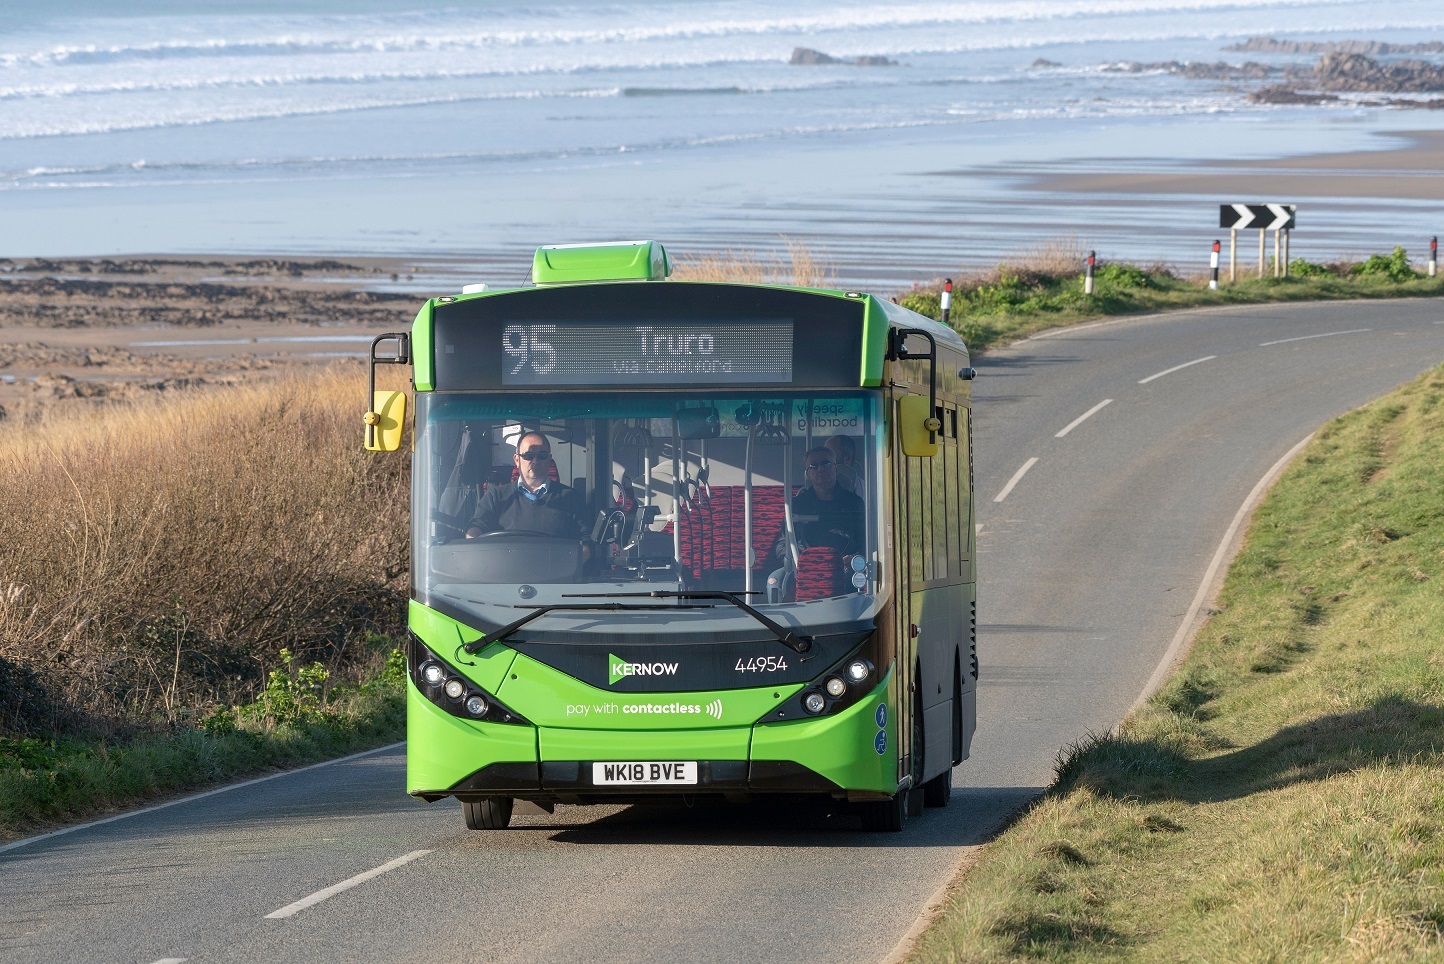 Hint that bus revenue support may continue beyond March 2023